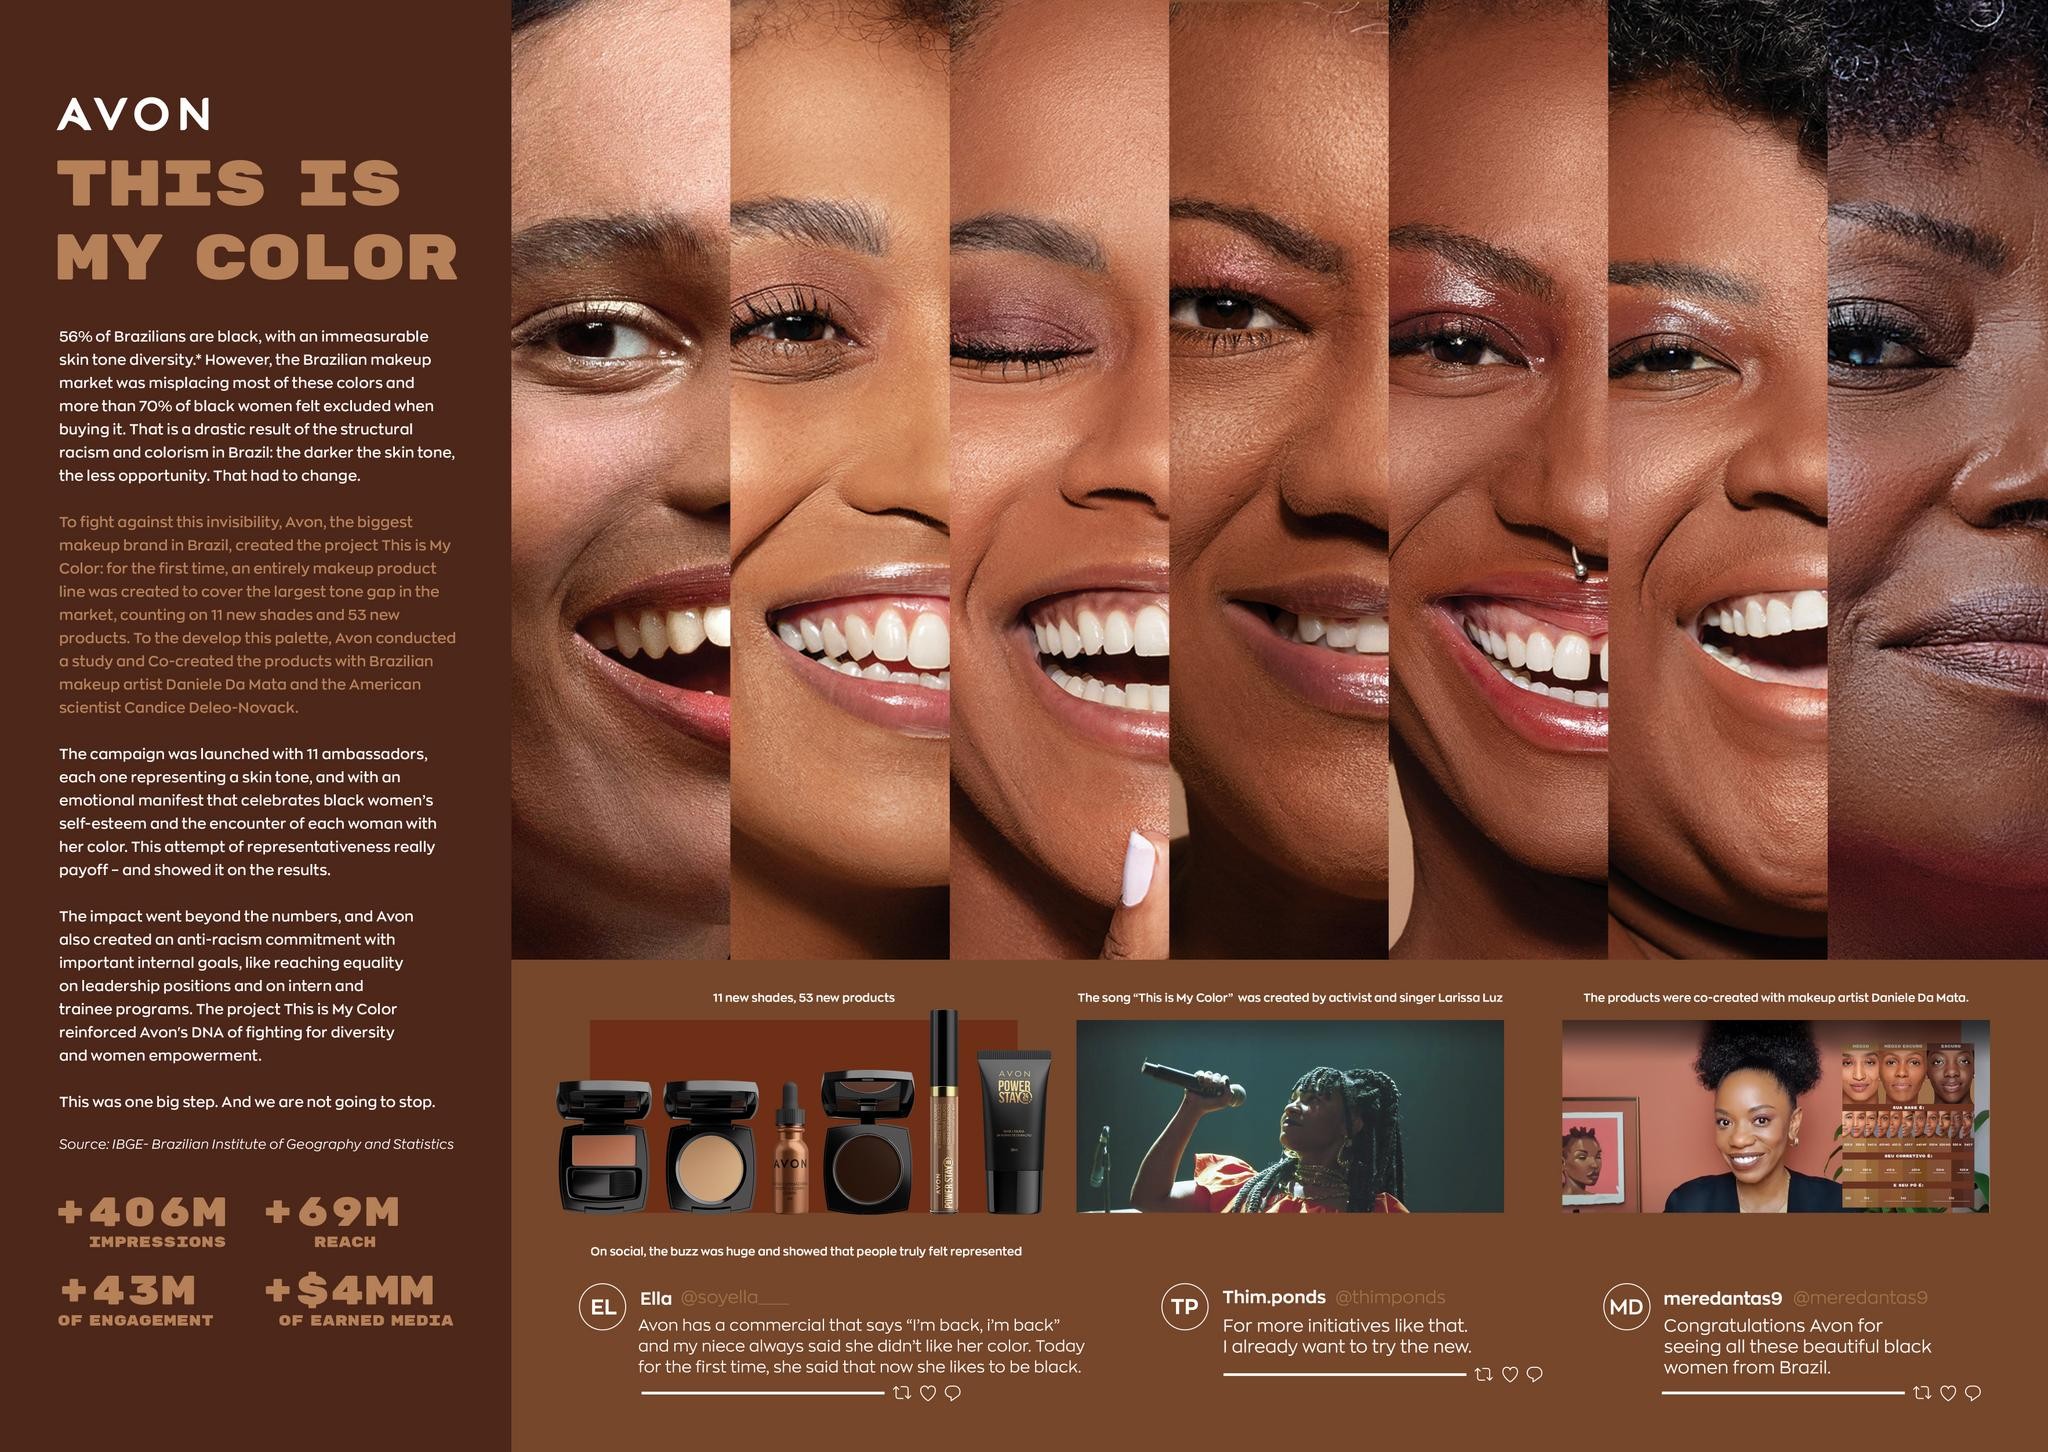 With “This is My Color” campaign and commercial, Avon launches